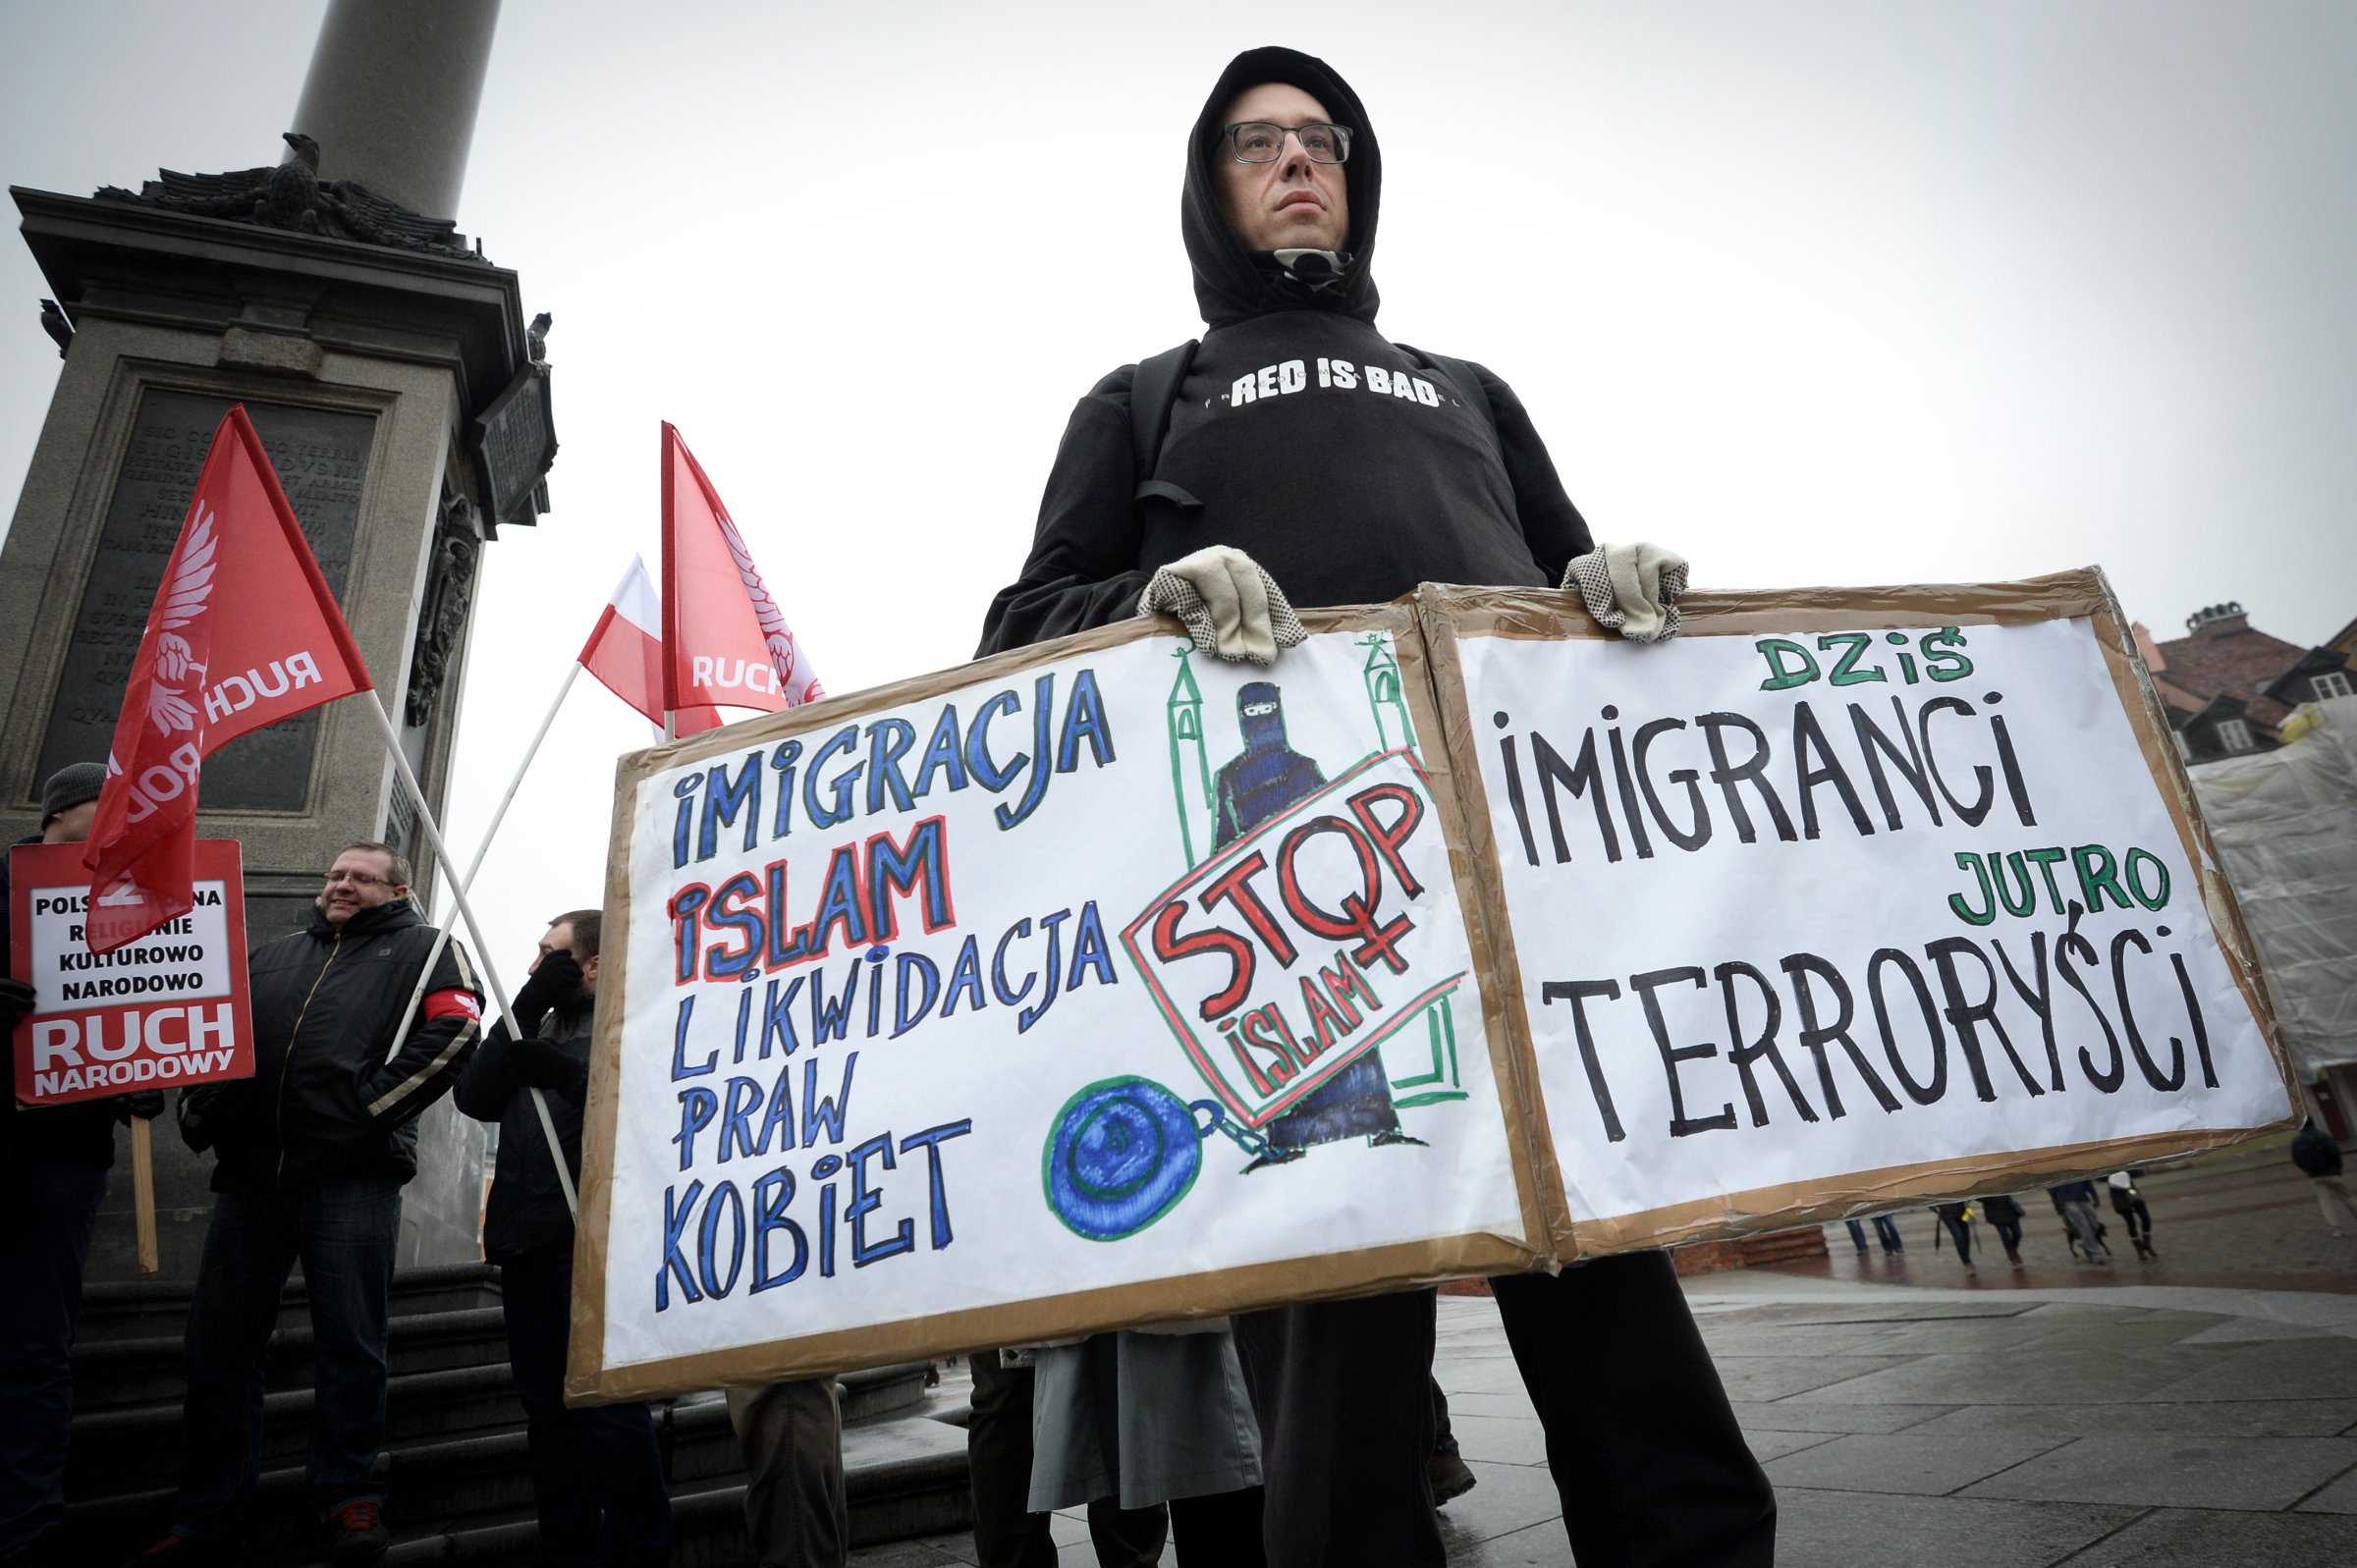 Several dozen members of the National Radical Camp demonstrate against immigration in Warsaw, Poland on Nov. 24, 2018.